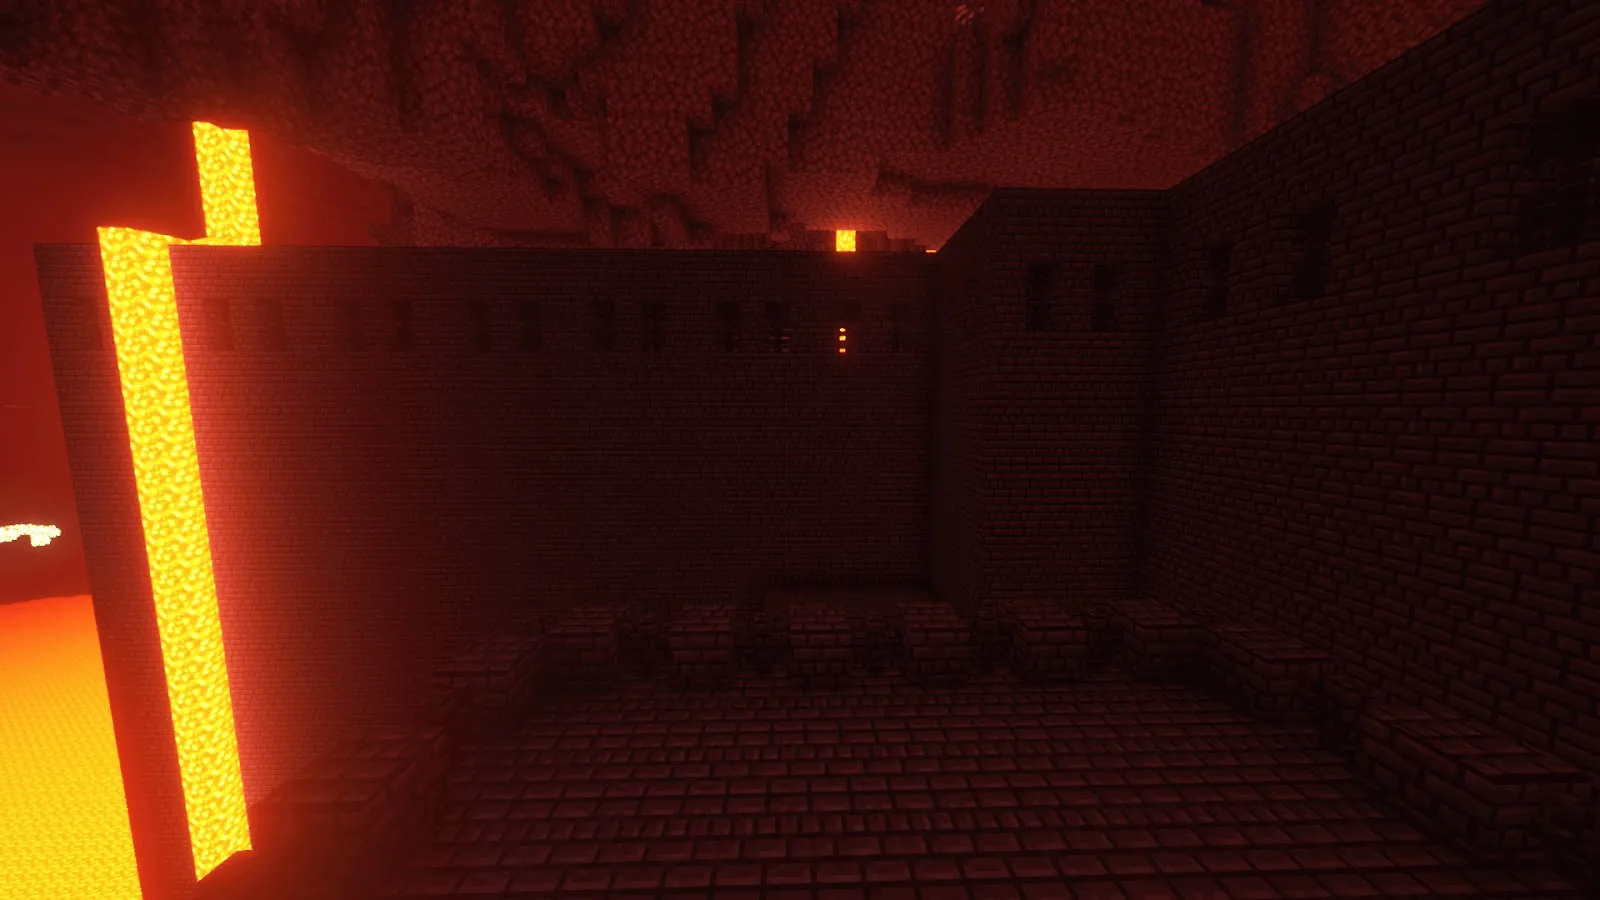 nether fortress